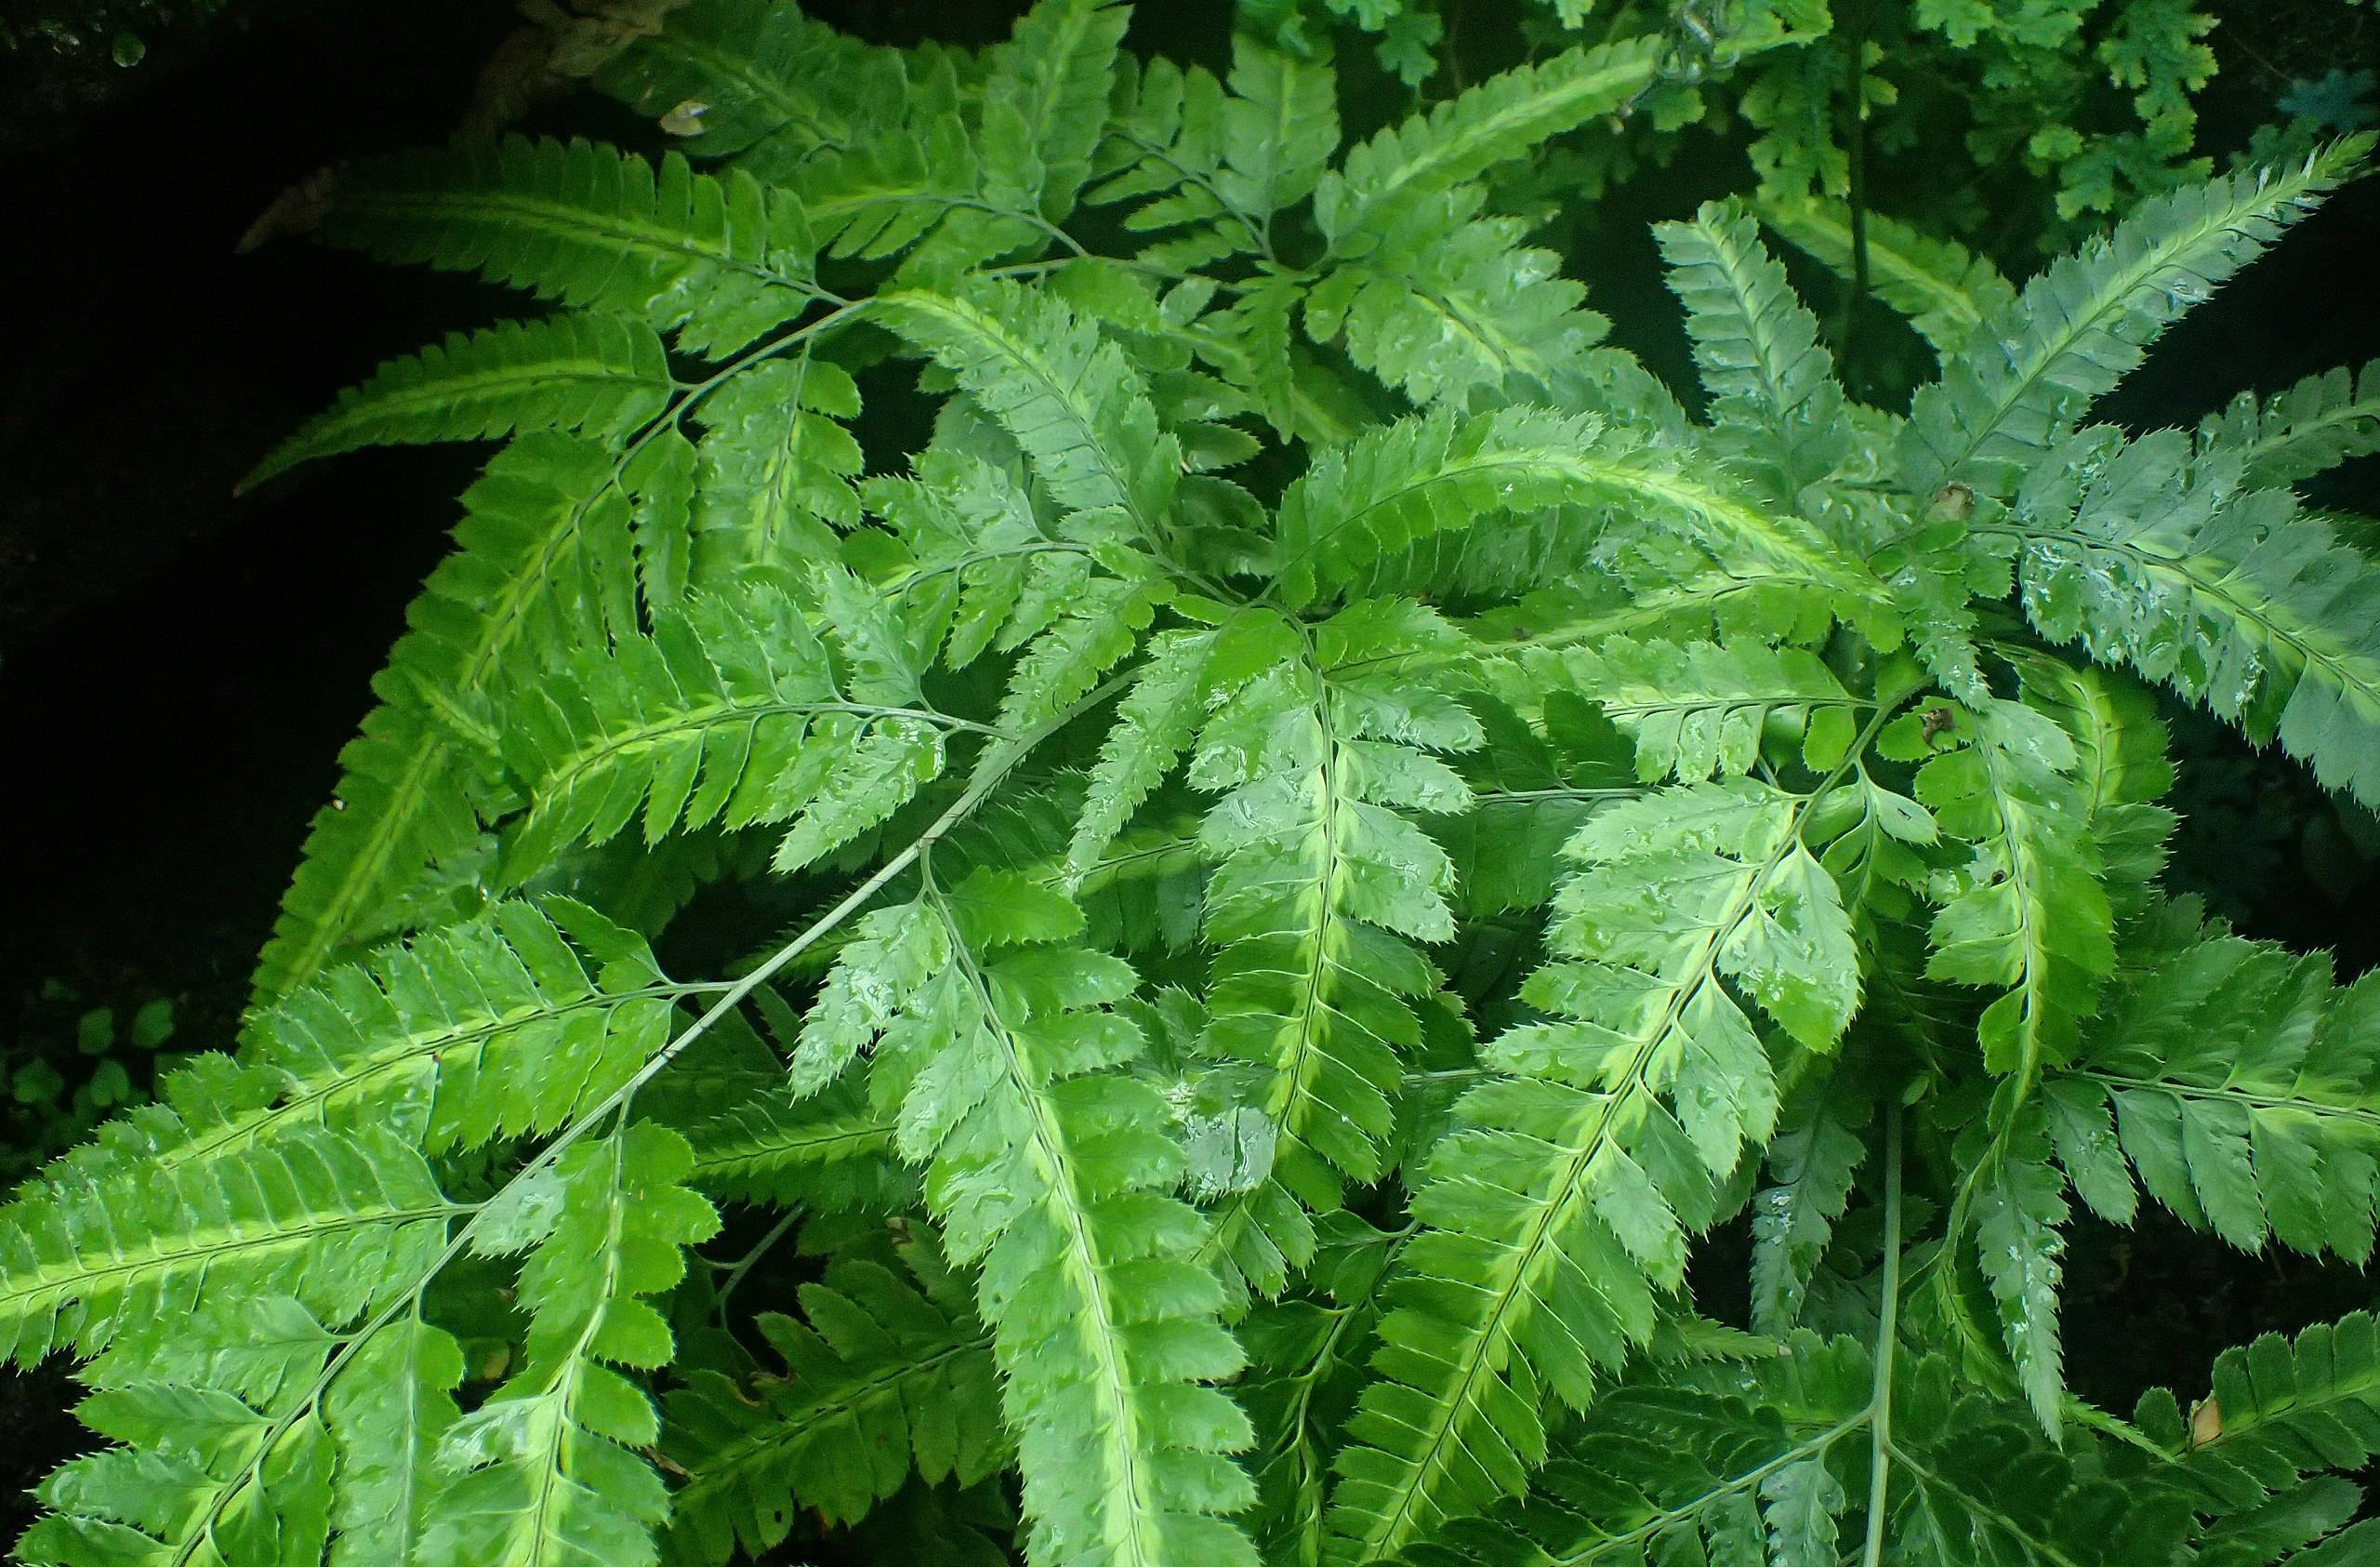 lush-green leaves and stems